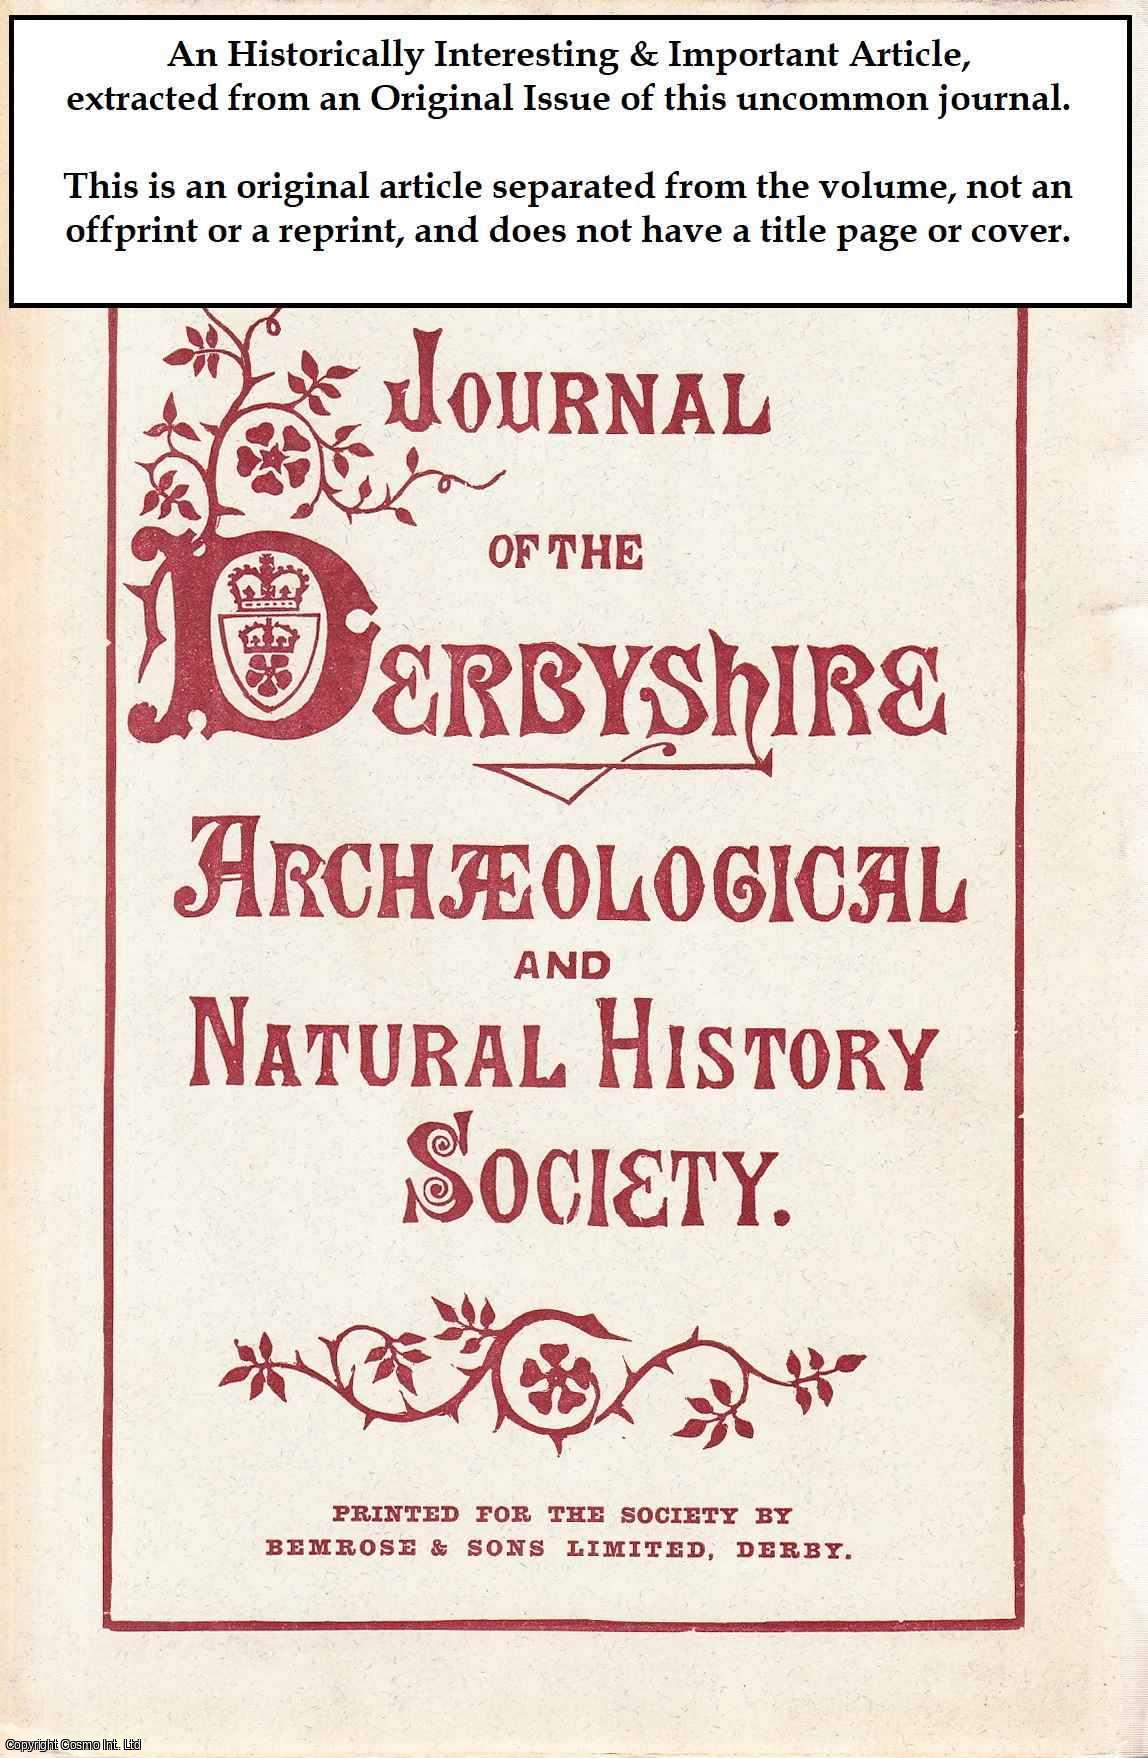 Alfred Hughes - Accounts of John Bagshaw of Abney Grange, in The Reign of George I. An original article from the Journal of the Derbyshire Archaeological & Natural History Society, 1905.